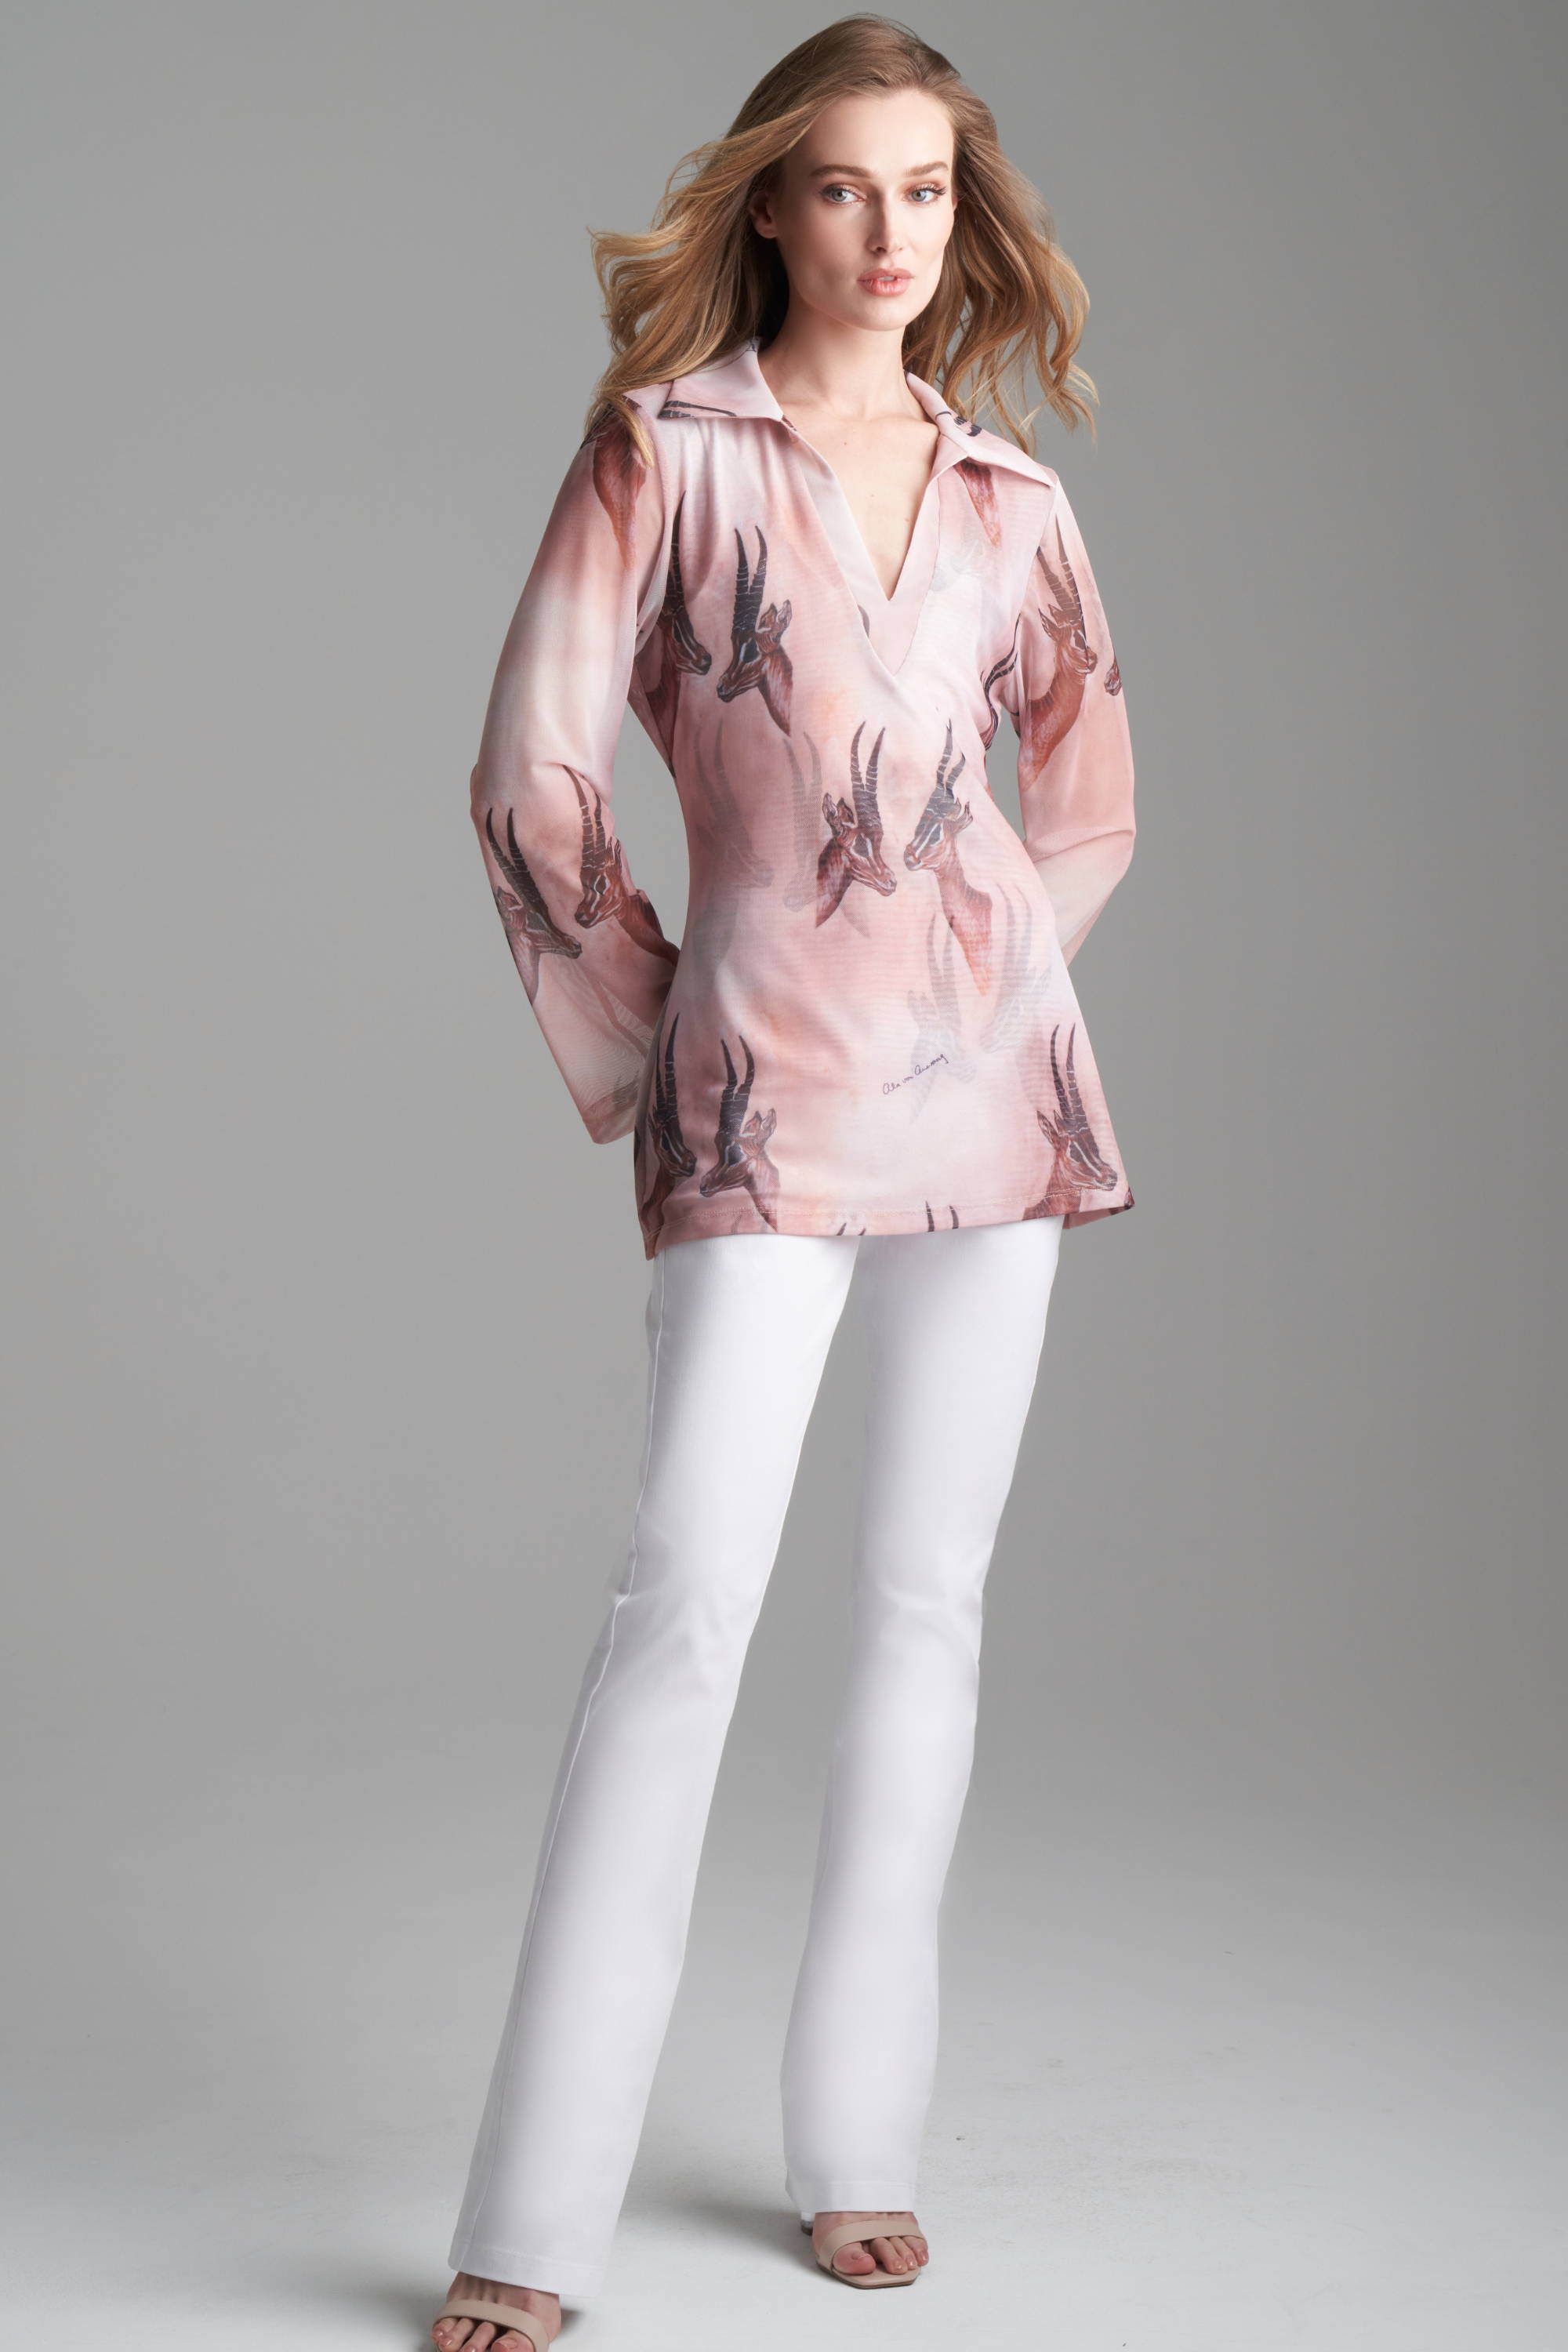 Woman wearing horn printed mesh shirt with white stretch cotton pants by Ala von Auersperg